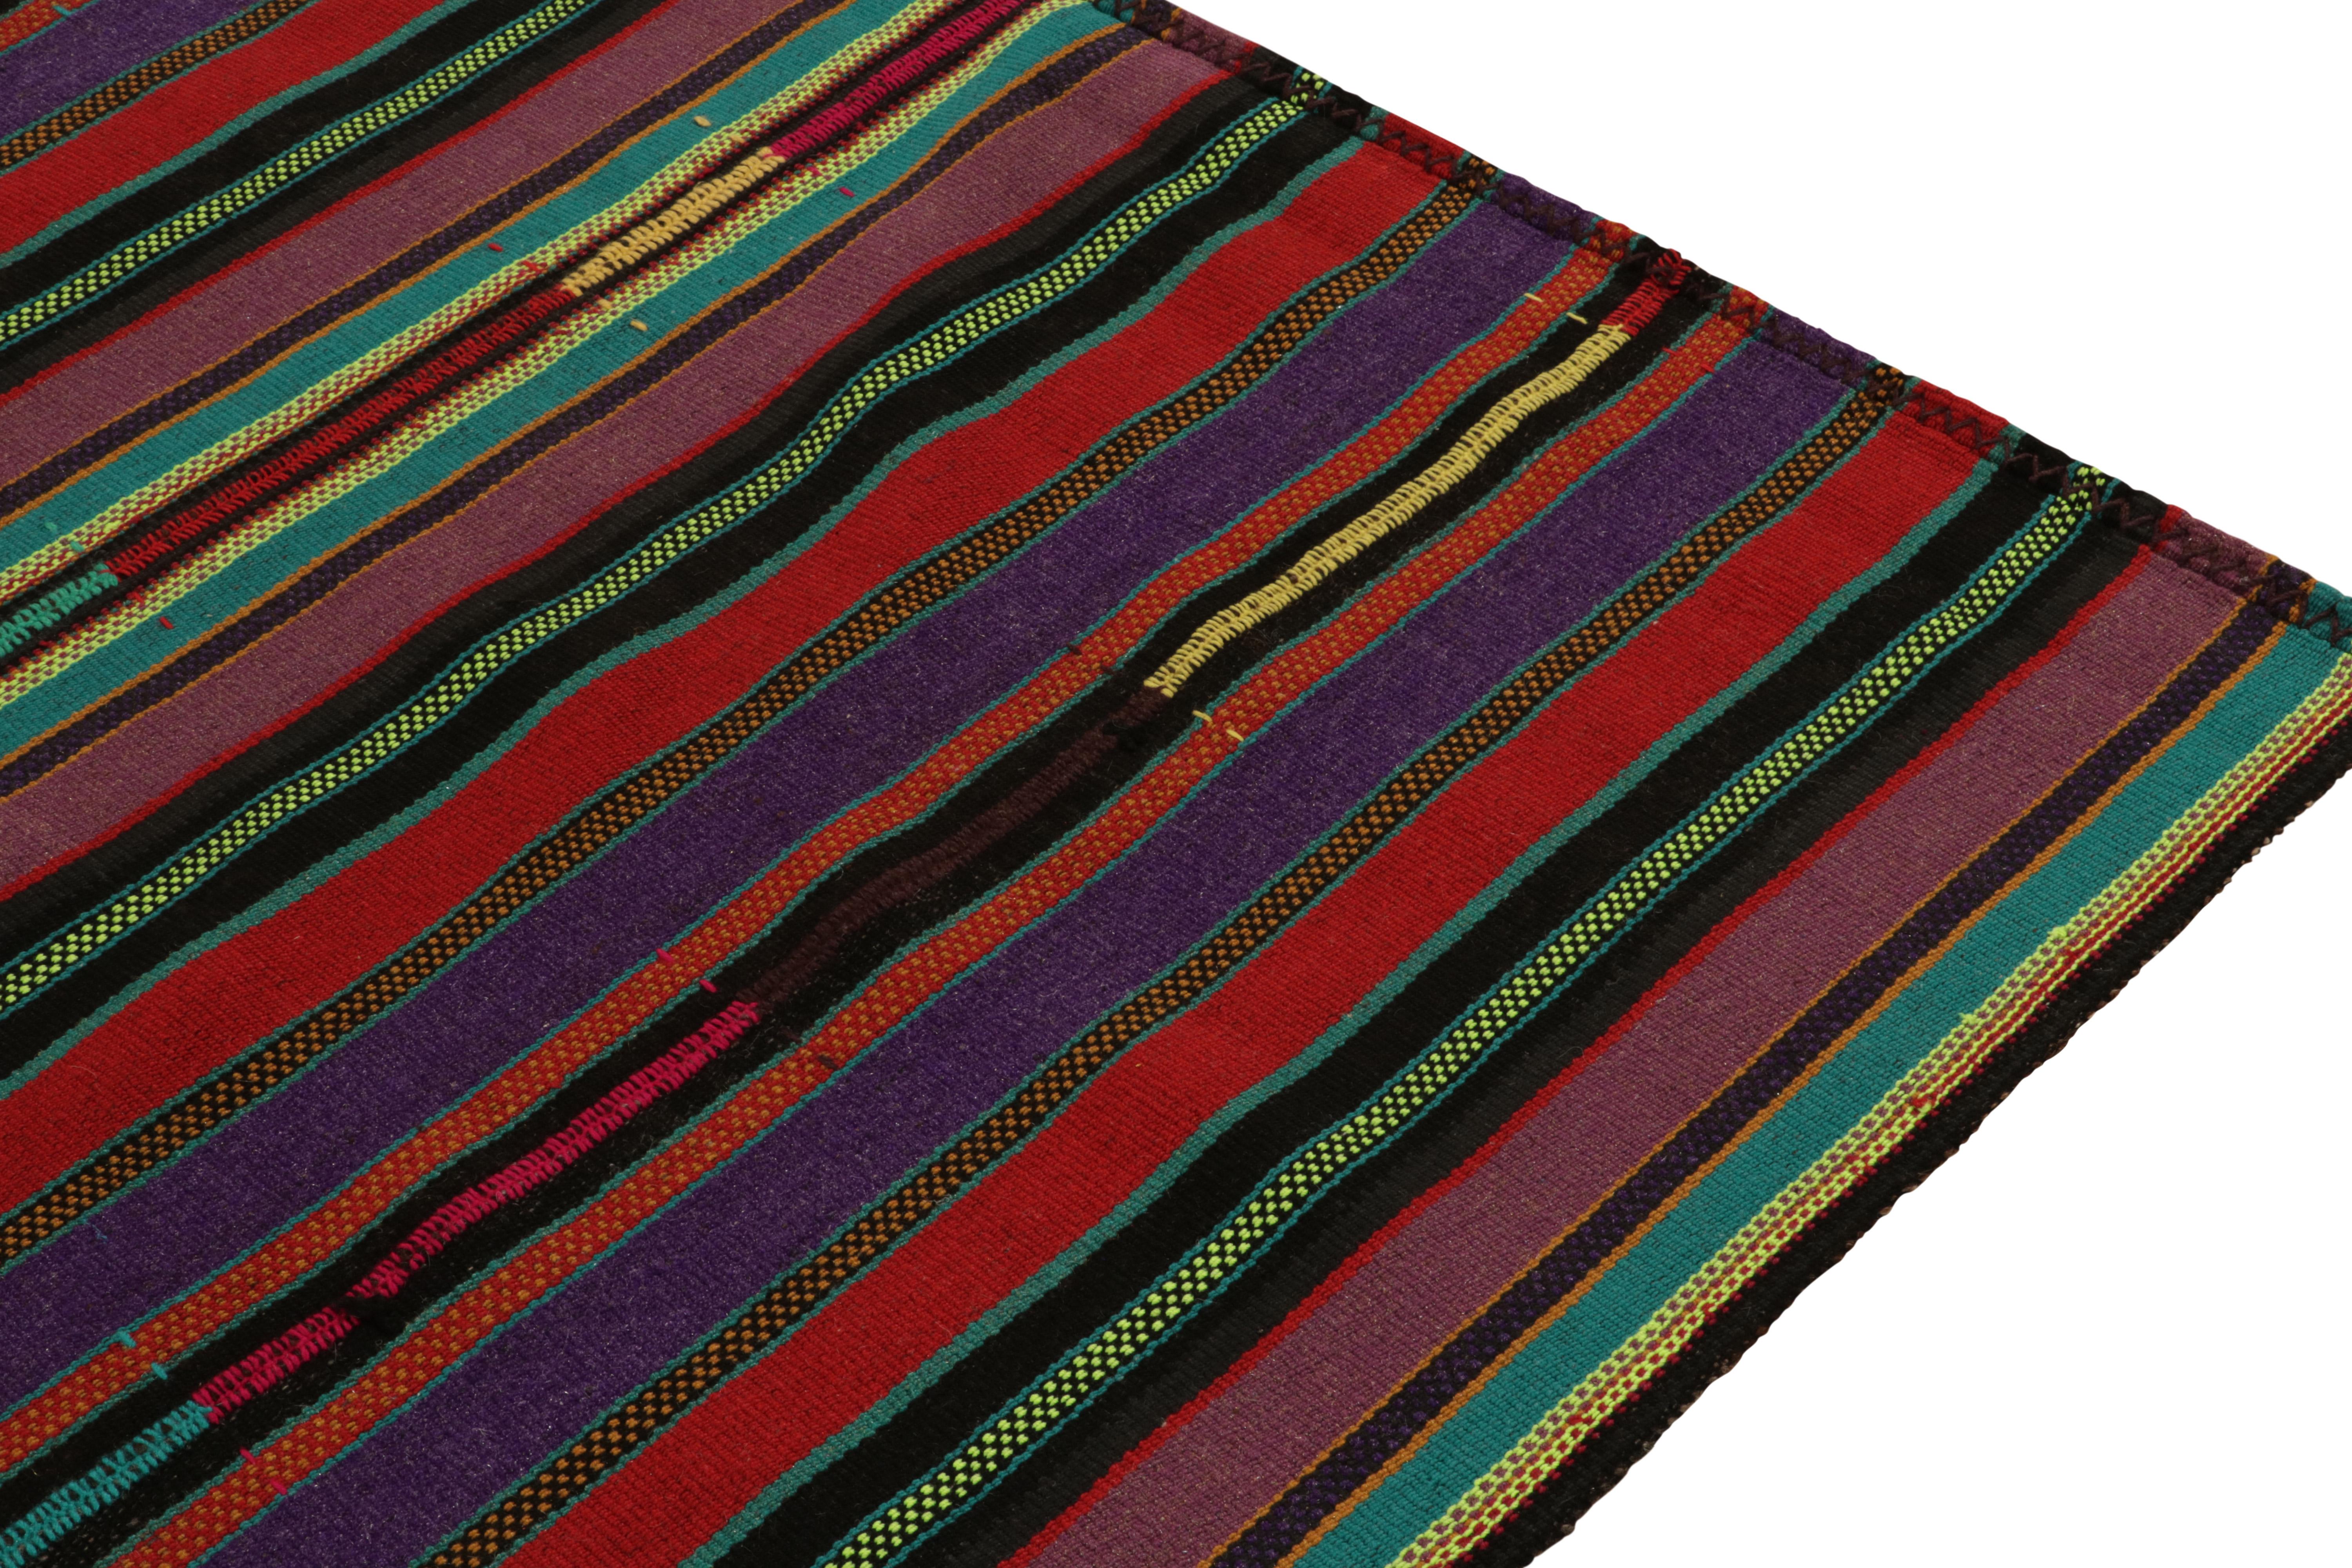 Hand-Knotted 1950s Vintage Kilim Style in Red, Purple, Green Stripe Patterns by Rug & Kilim For Sale